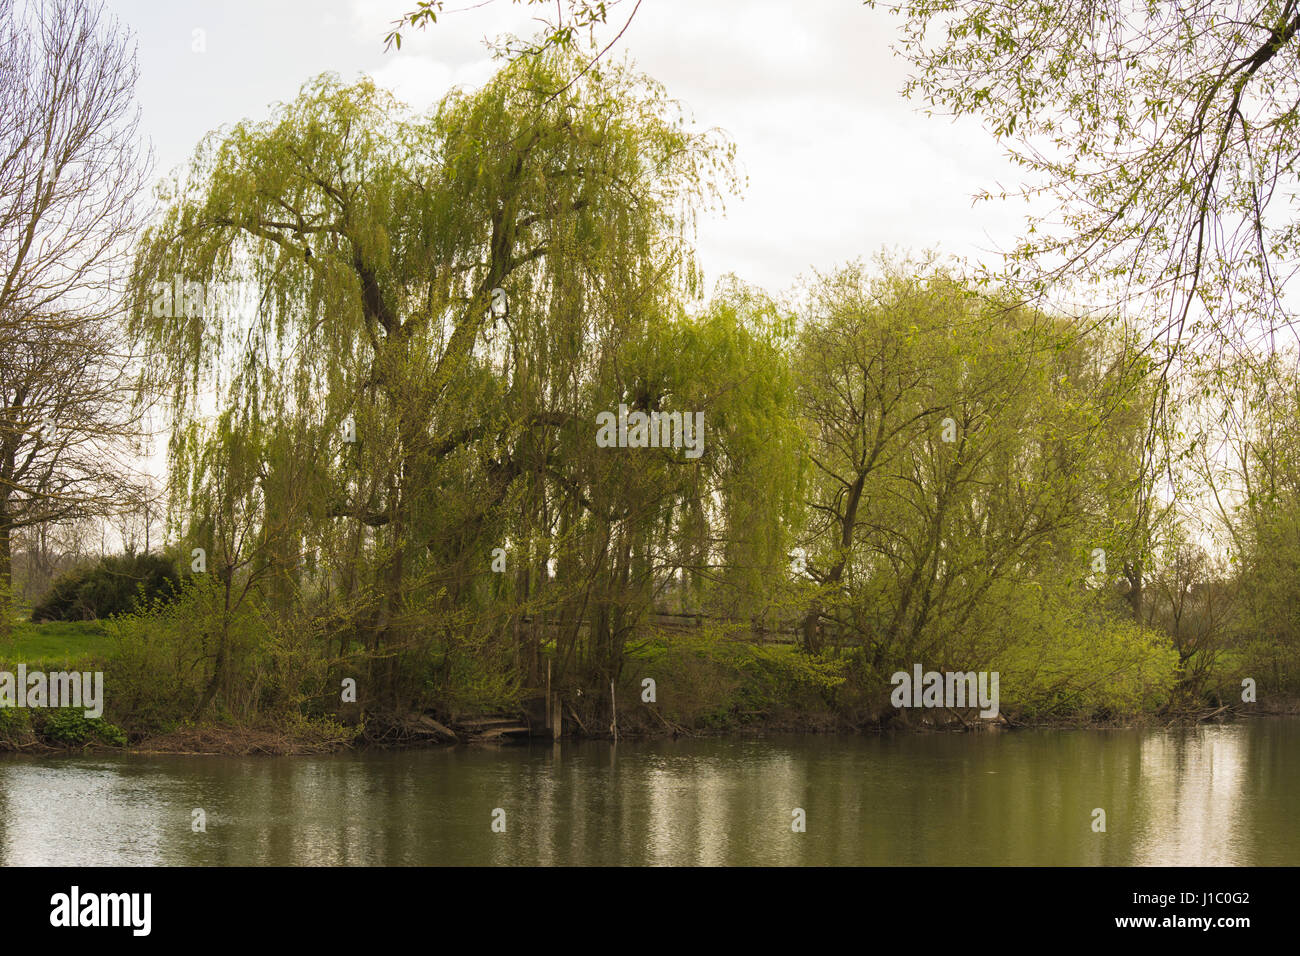 Thames River, Wallingford in Oxfordshire, UK, 2017 Stock Photo